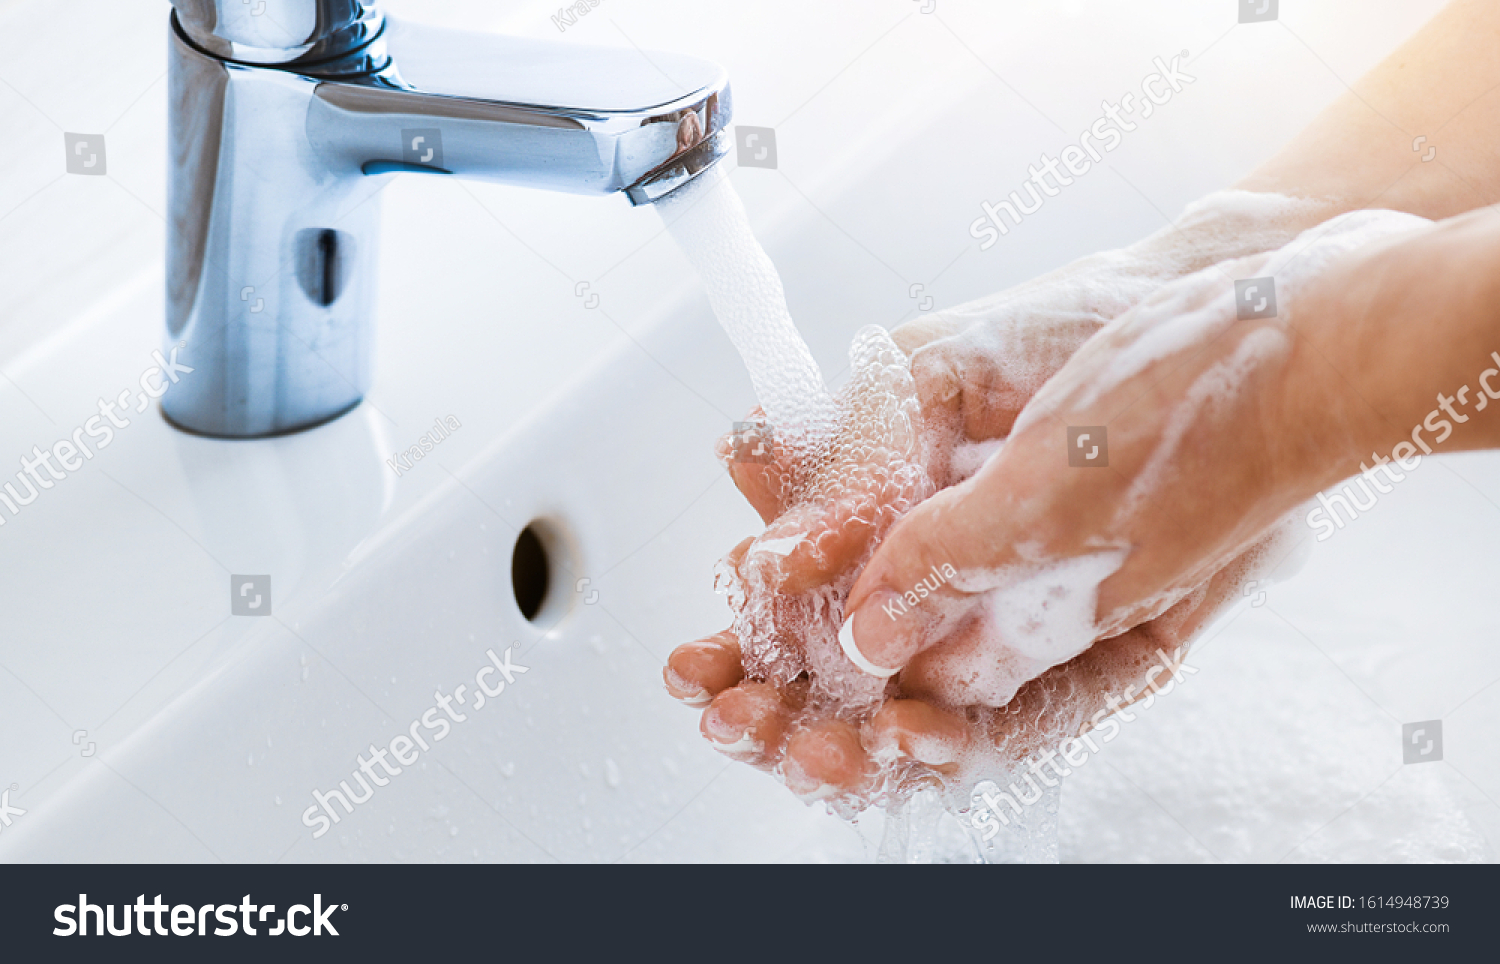 Woman use soap and washing hands under the water tap. Hygiene concept hand detail. #1614948739